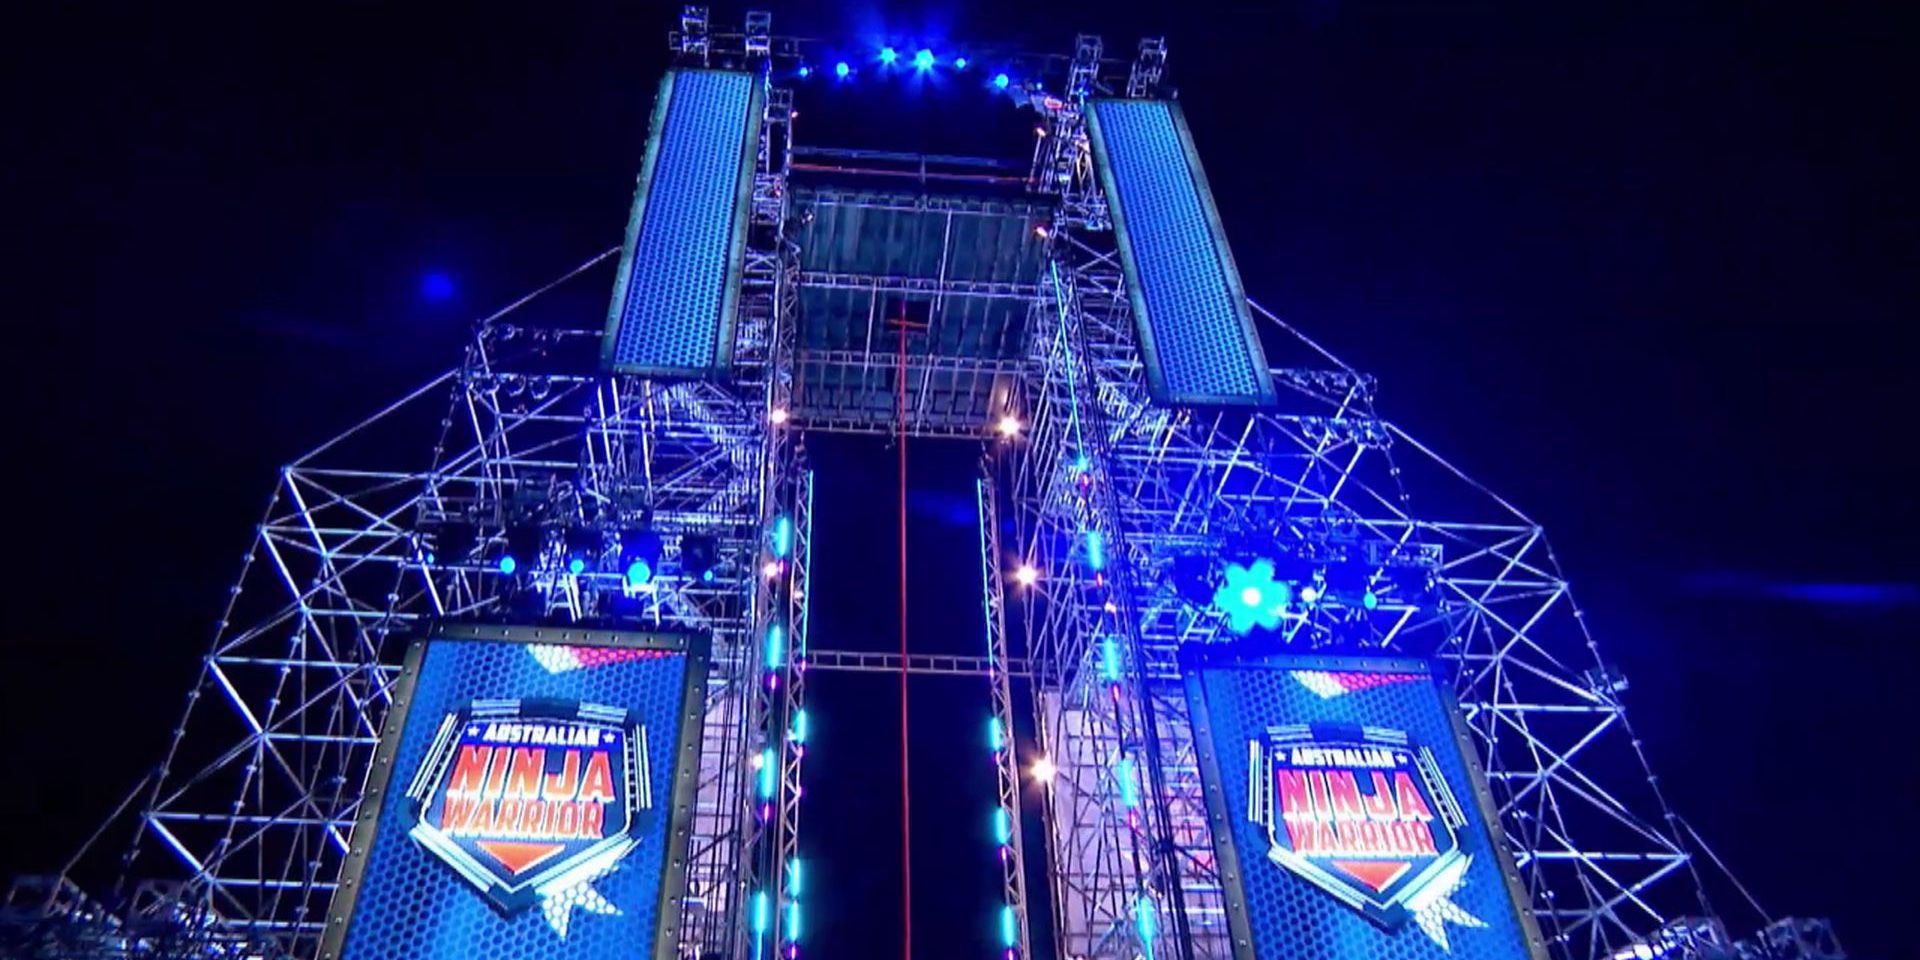 American Ninja Warrior How Season 13 Will Be Back to Normal (& How It